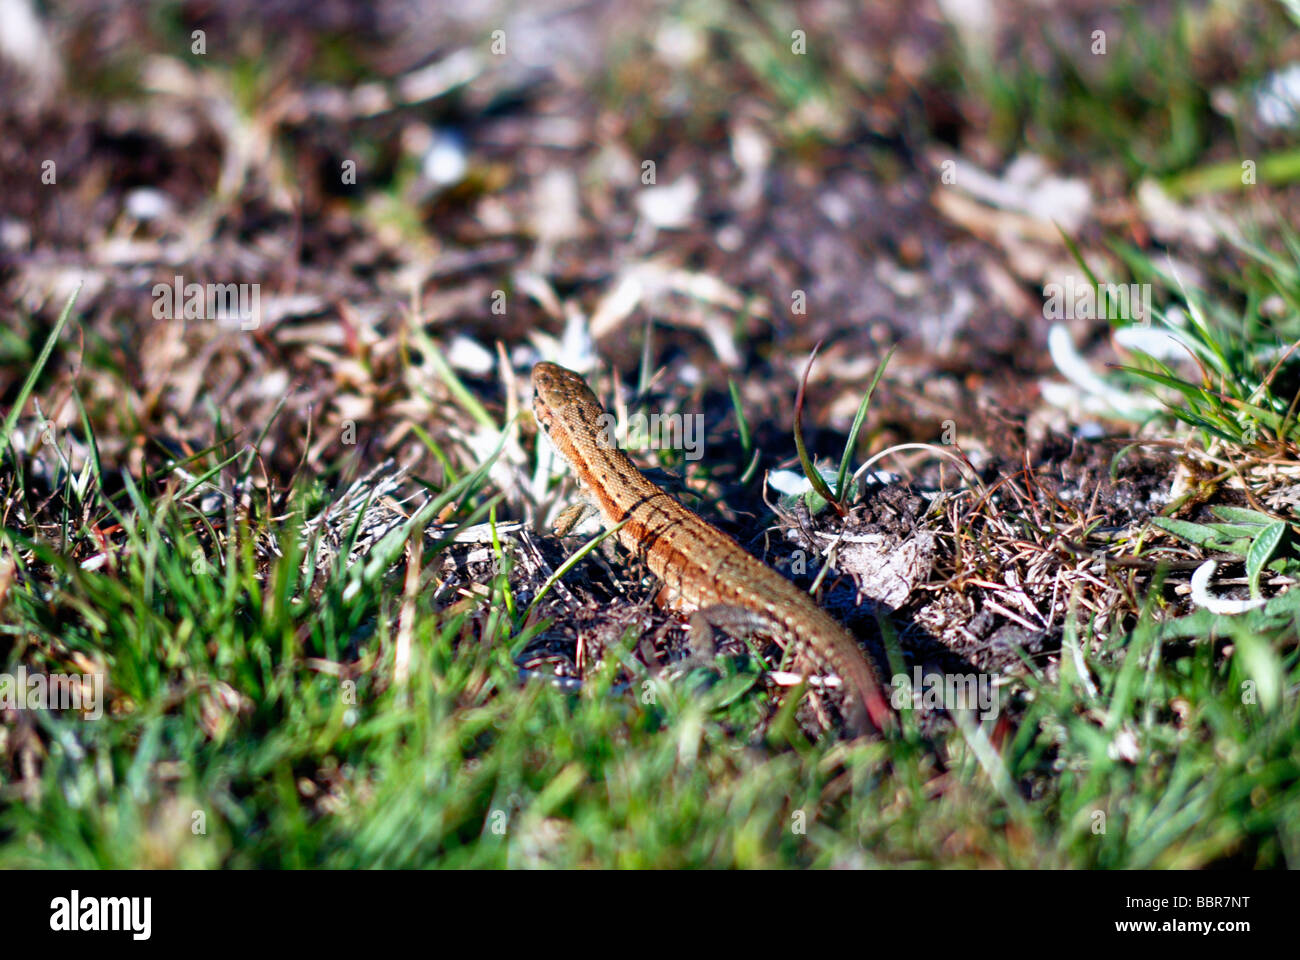 A common lizard in the grass Stock Photo